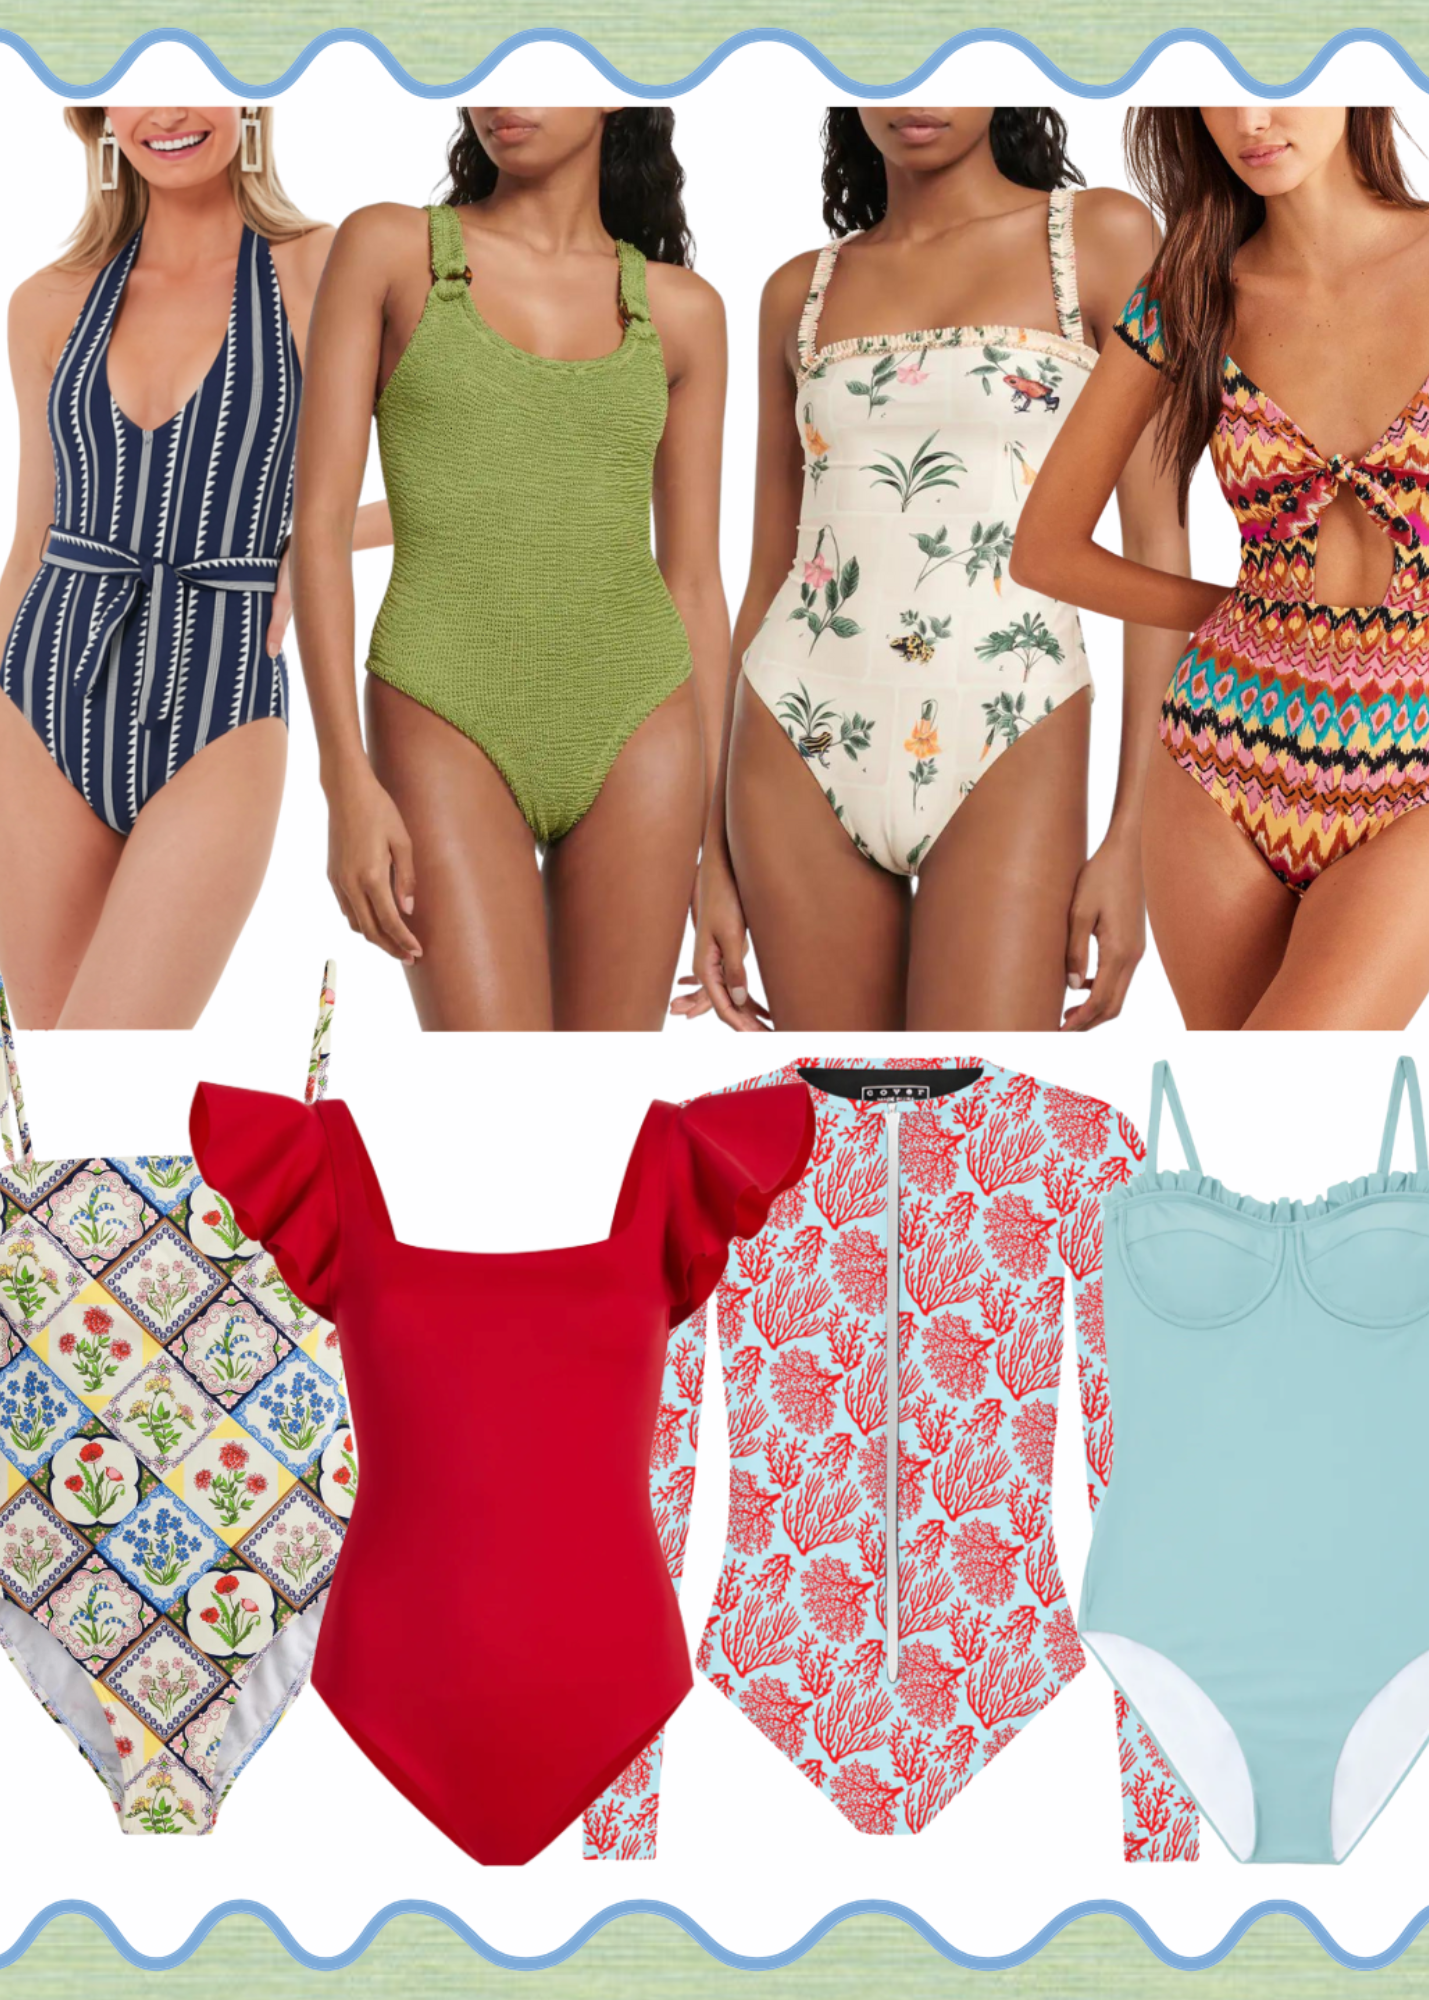 Best Swimsuits for Moms: 30 Flattering Bathing Suits - Sarah Tucker